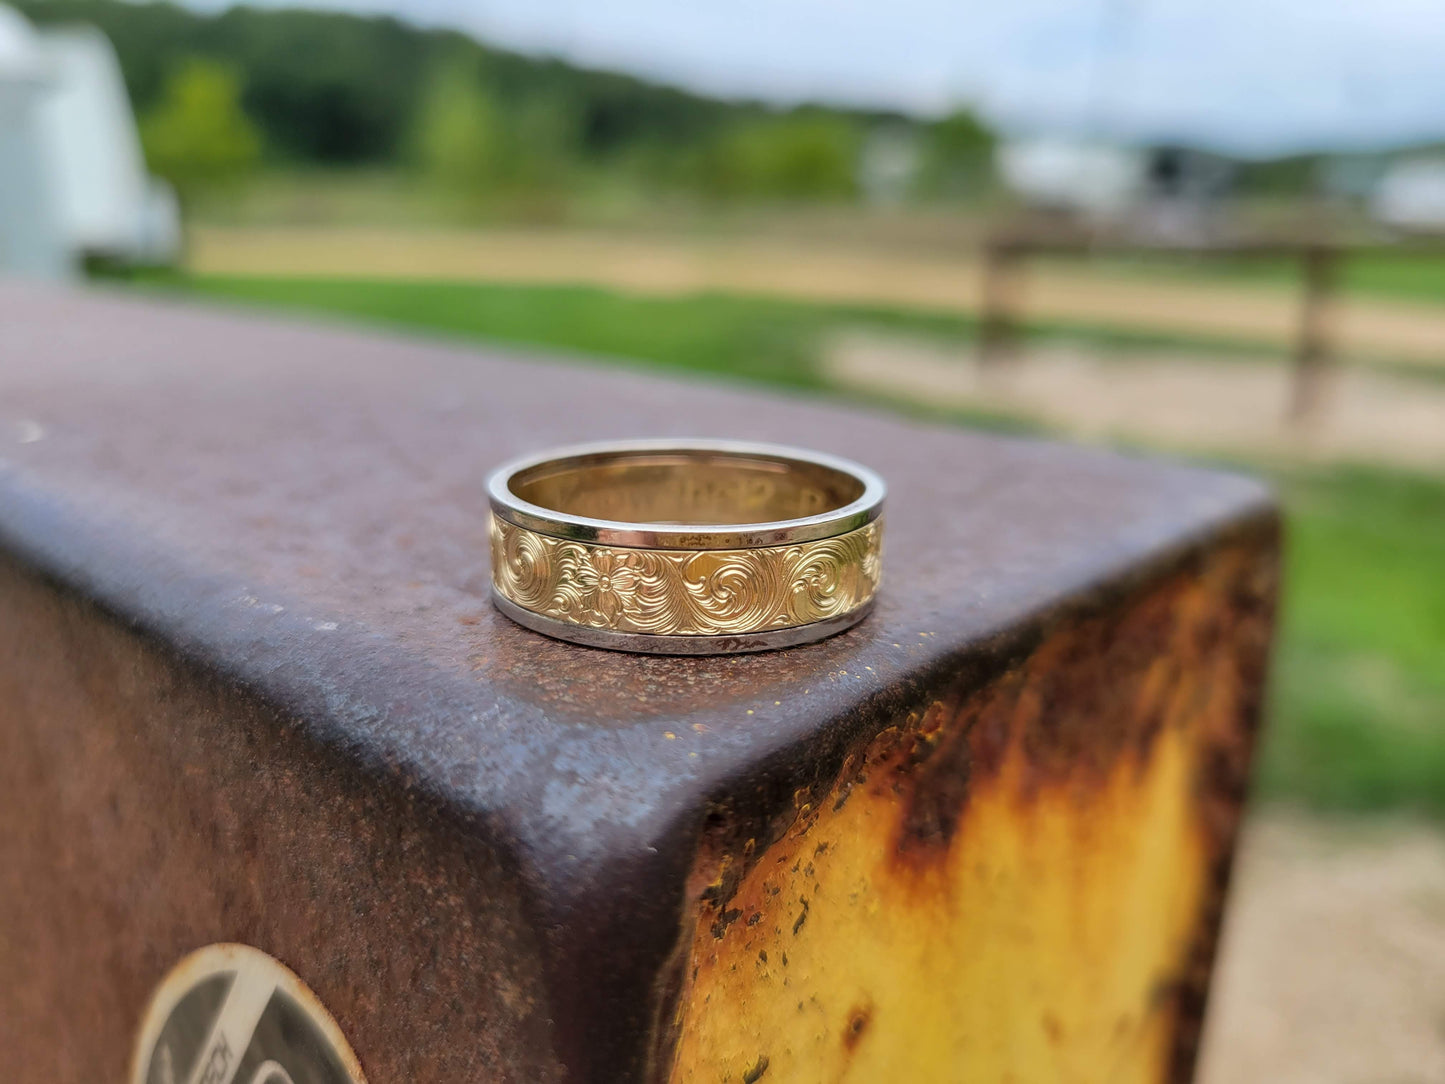 The Florian: Men's Western Wedding Ring, Two-tone 10K White and Yellow Gold Band with Hand-Engraved Swirls and Flowers